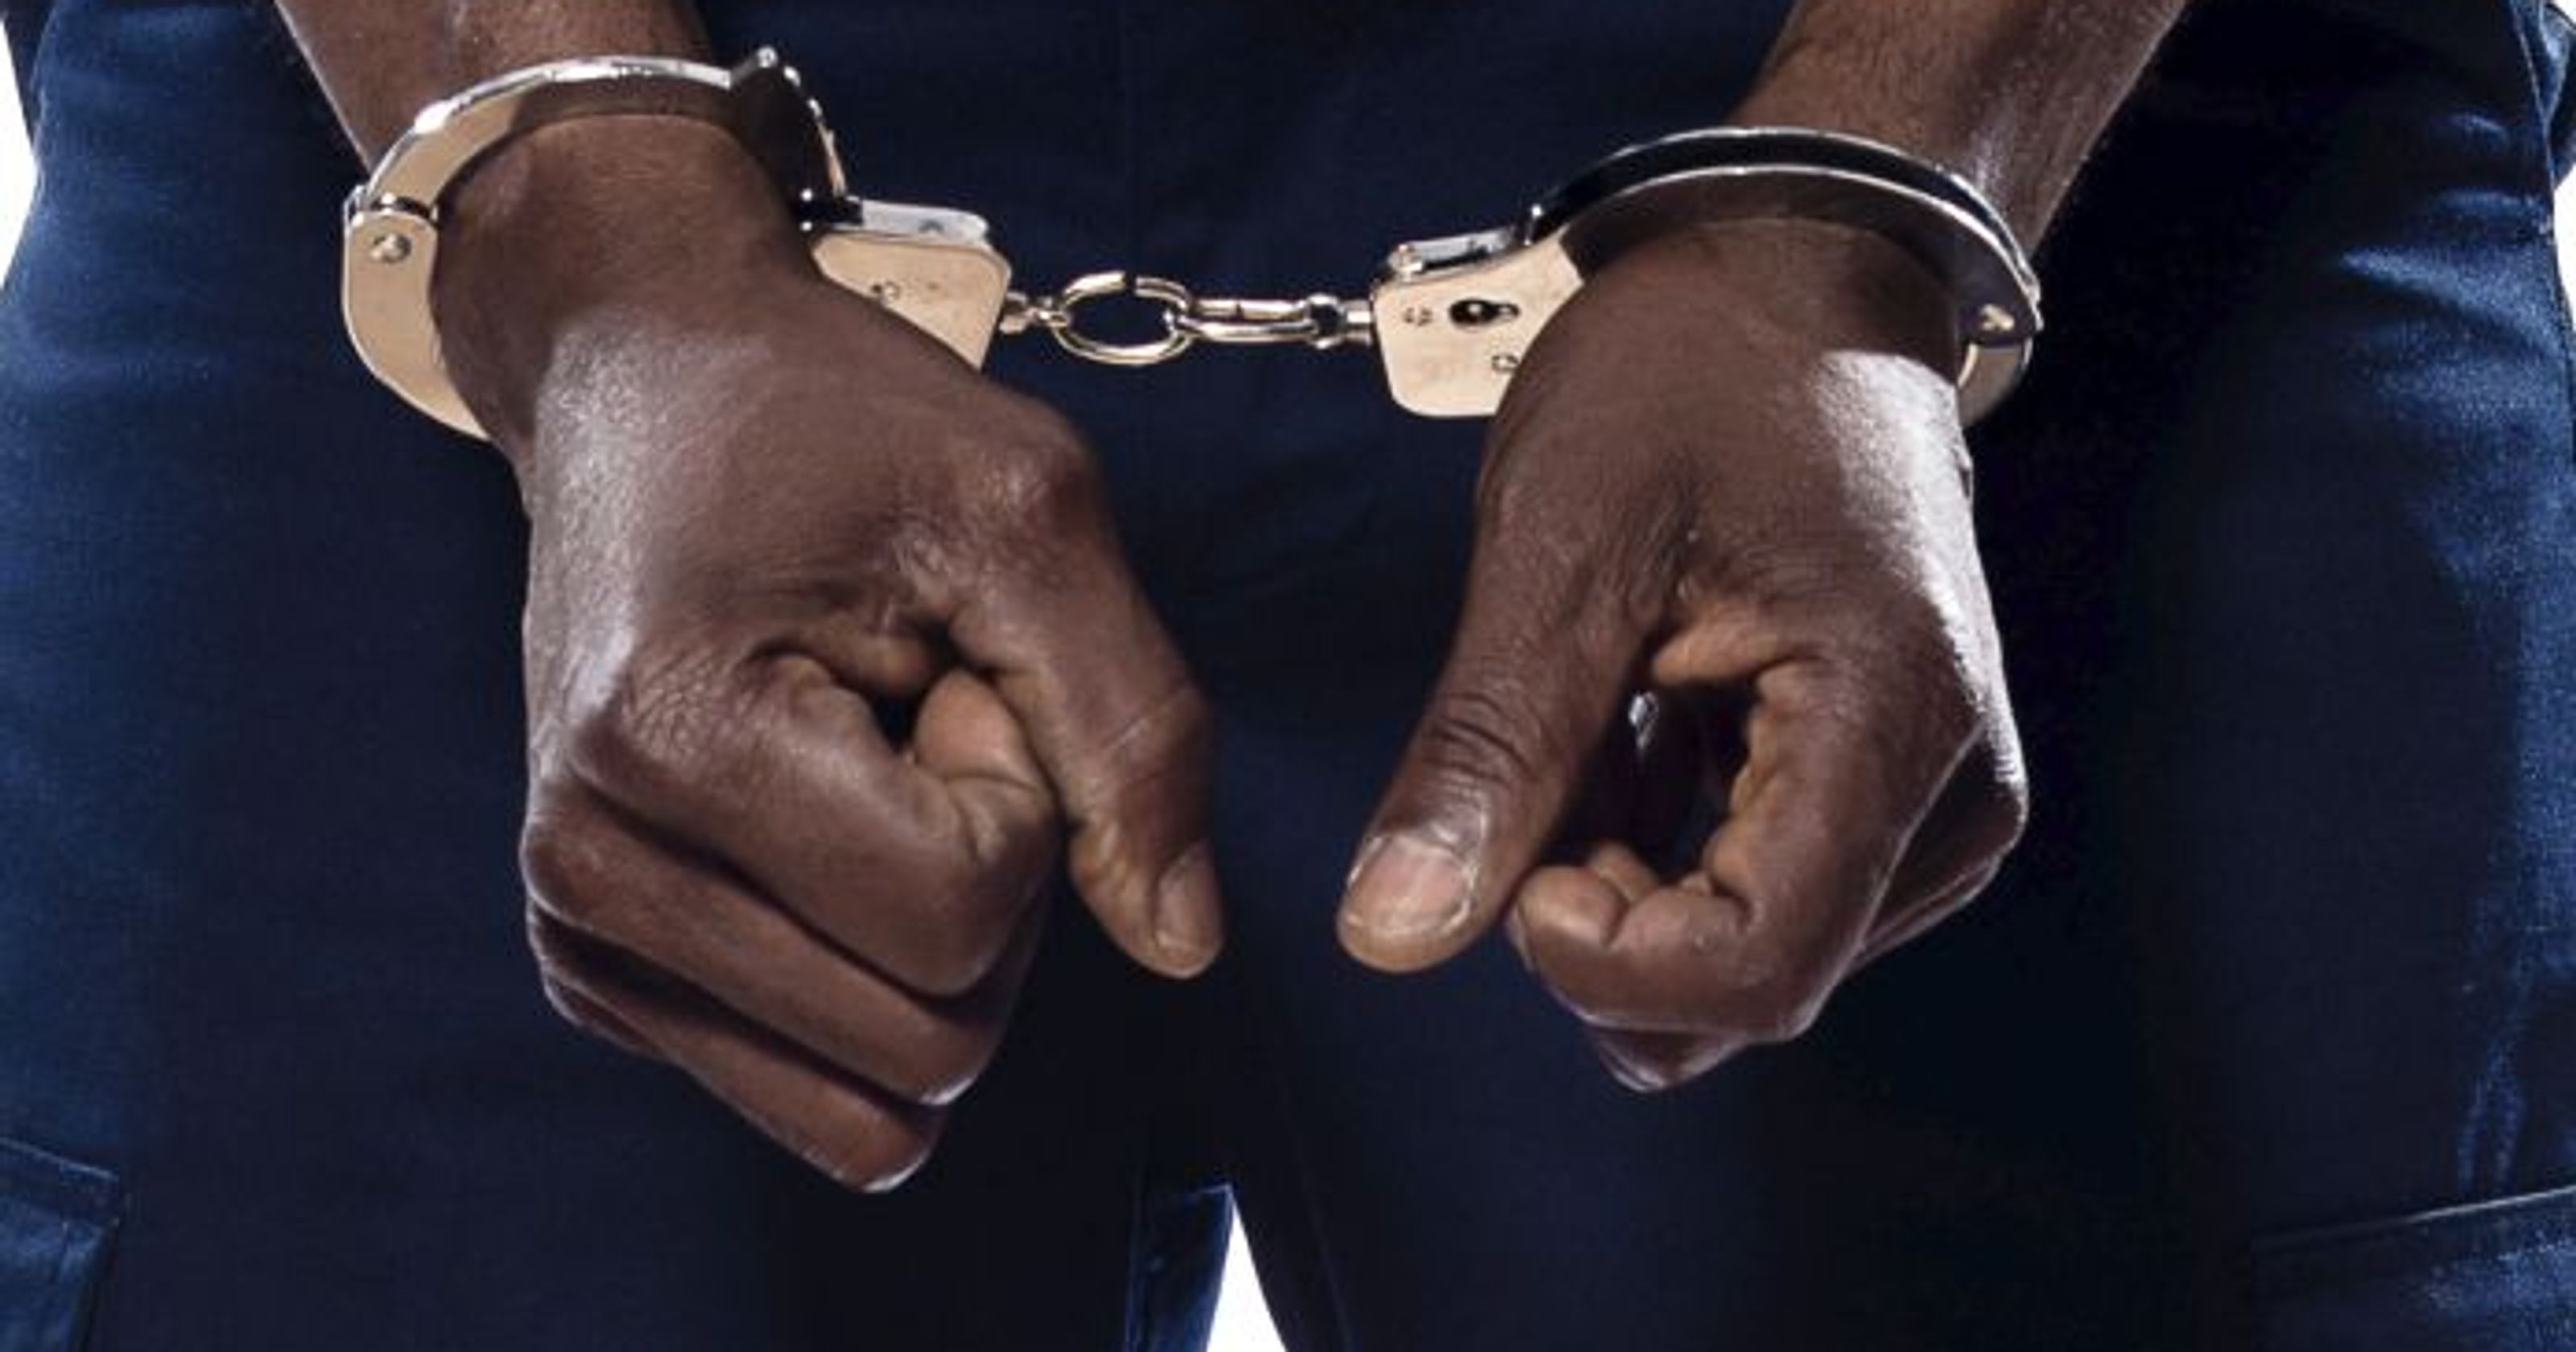 South Sudan: Three Arrested for Gang Raping 13-Year-Old